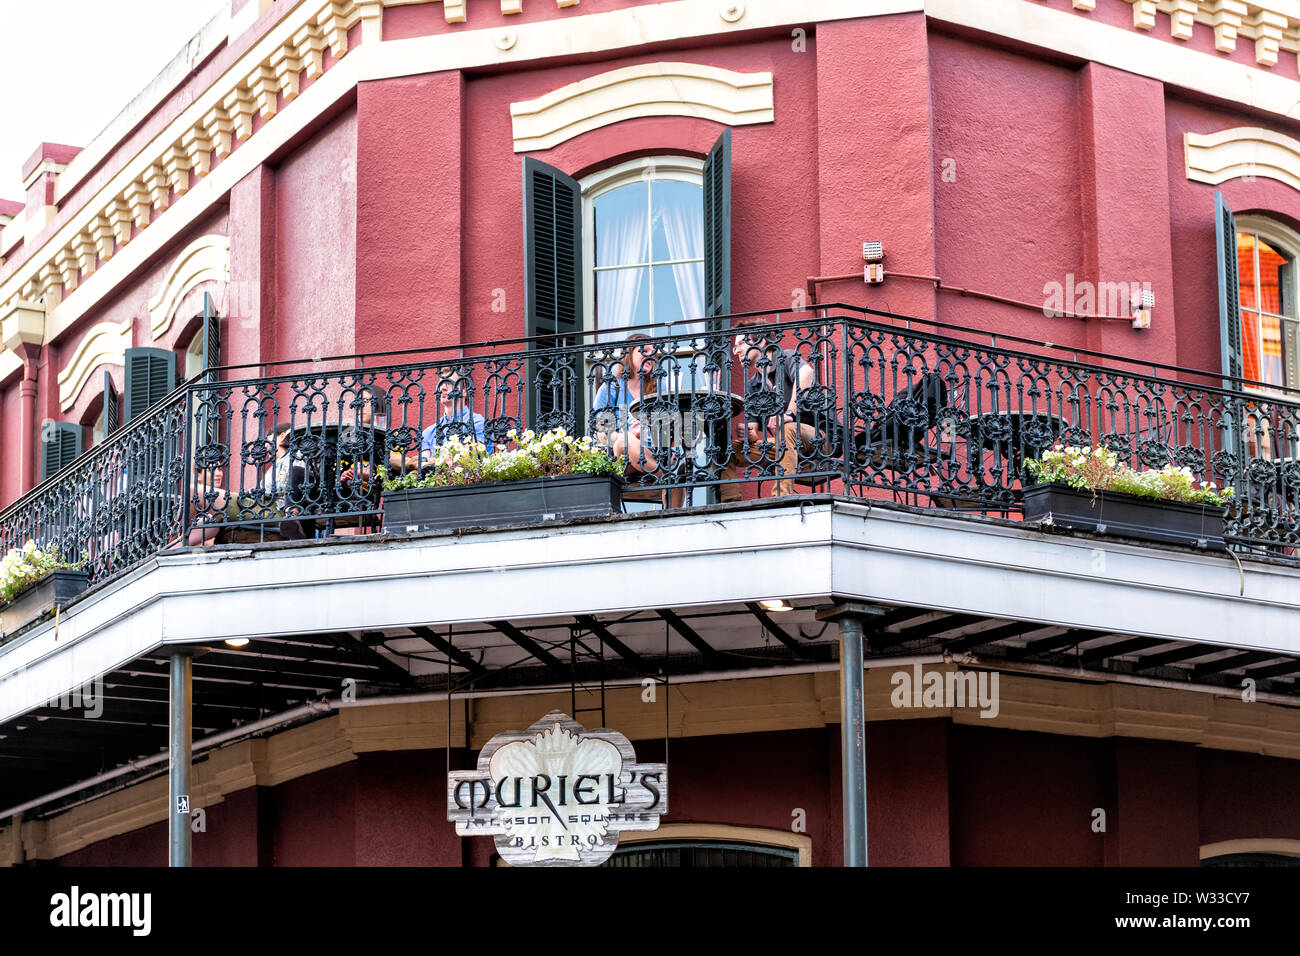 New Orleans, USA - April 22, 2018: People couple sitting at Muriel's Jackson square bistro restaurant at cast iron wrought building balcony in Louisia Stock Photo